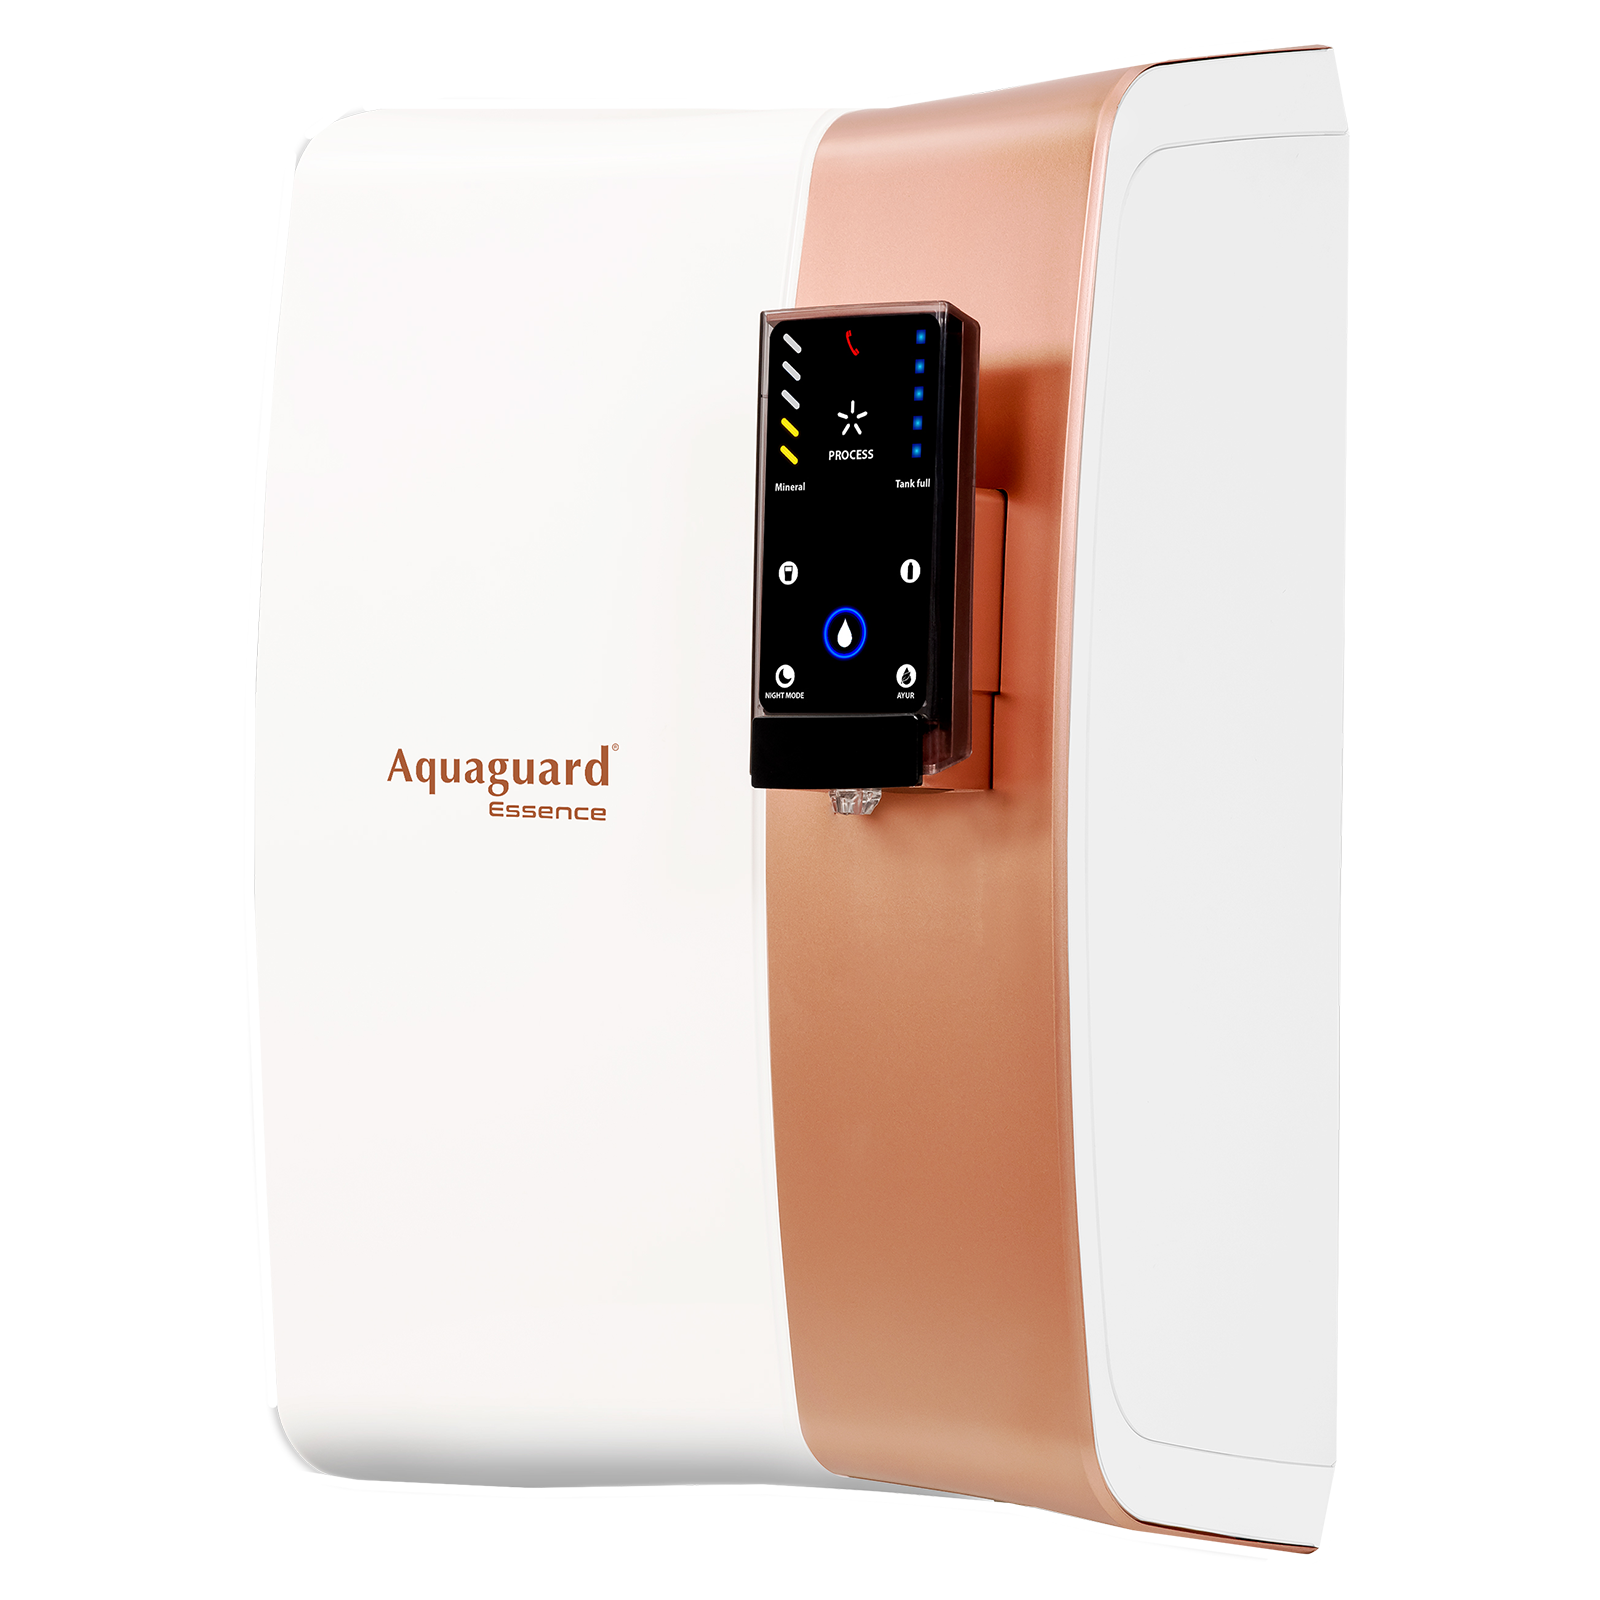 Aquaguard Essence 6L RO + UV Electrical Water Purifier wih Mineral Content Sensor (White and Gold)